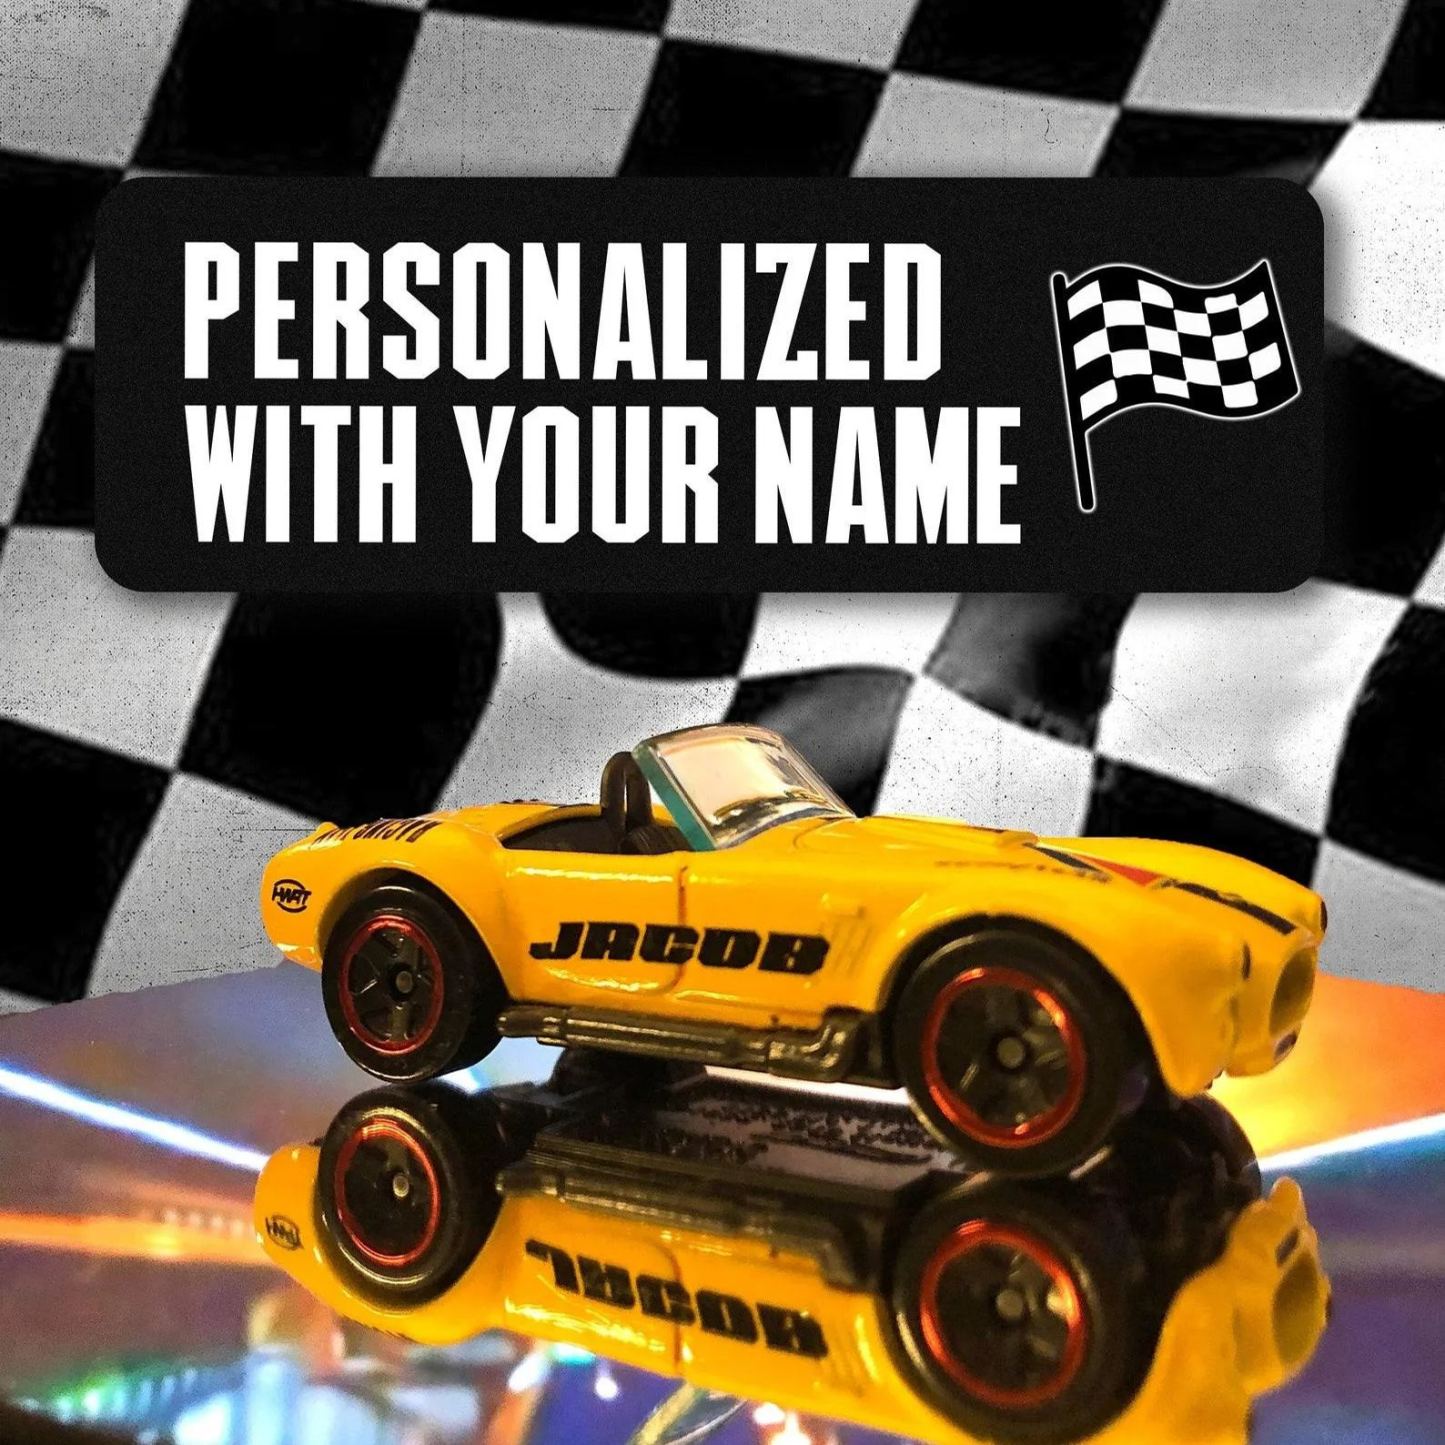 Personalized with your name cars personalized - Cars & Trucks - Personalized Gifts for all ages Father's day gifts